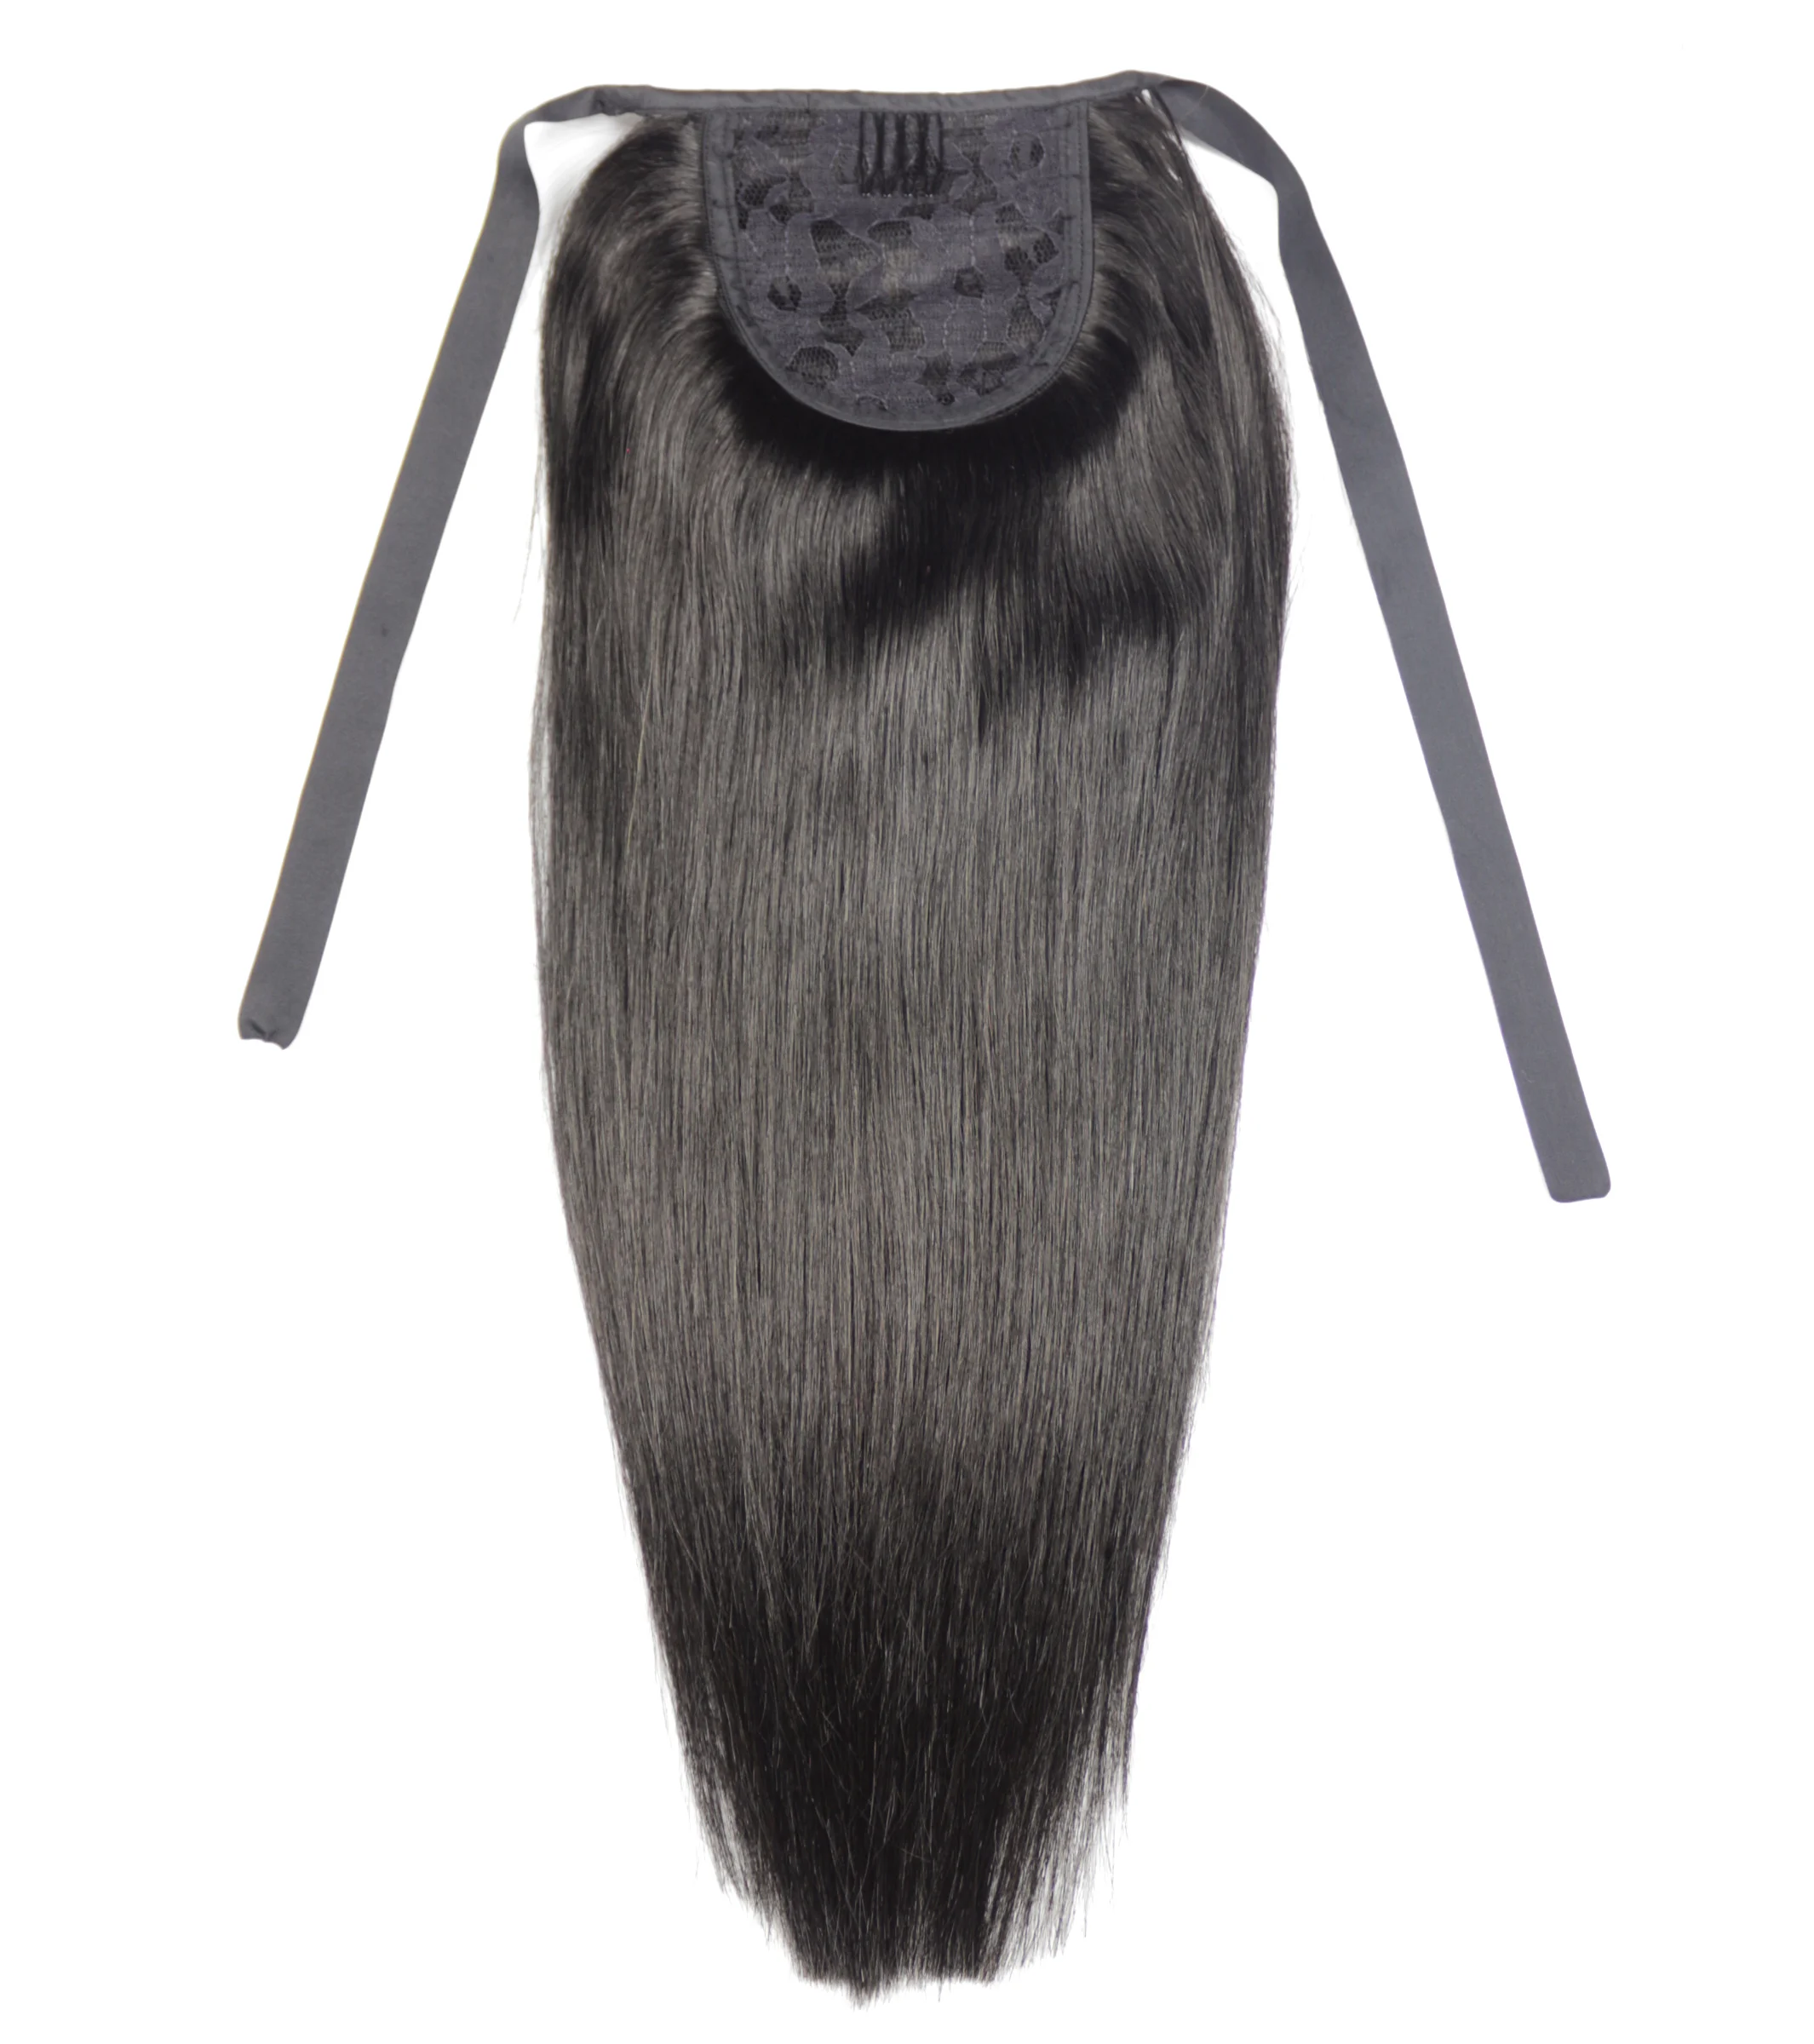 

ZZHAIR 100% Brazilian Human Remy Hair Extensions 16"-20" Ribbon Ponytail 60g Horsetail Clips In Natural Straight